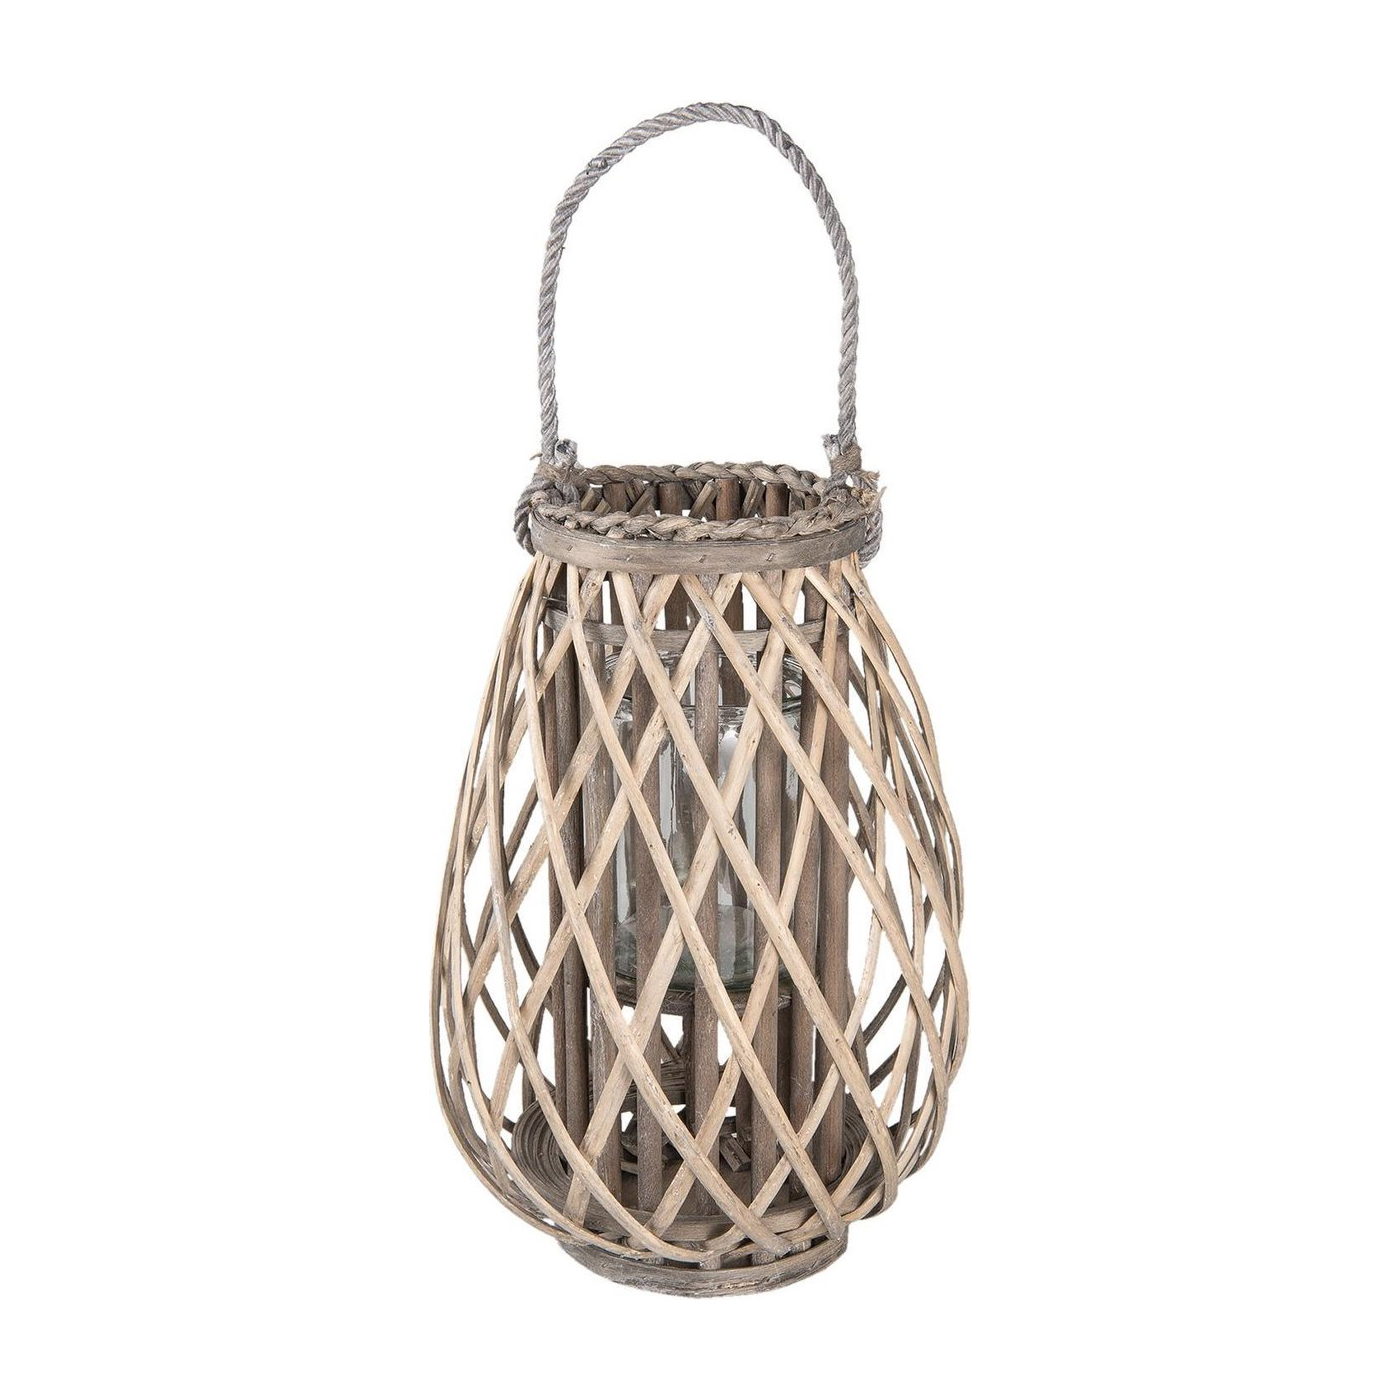 Grey Willow Lantern - New England Coastal & Country Furniture and Home Decor for beauriful homes. Hallway, Living Room Bedroom and Bathroom furniture